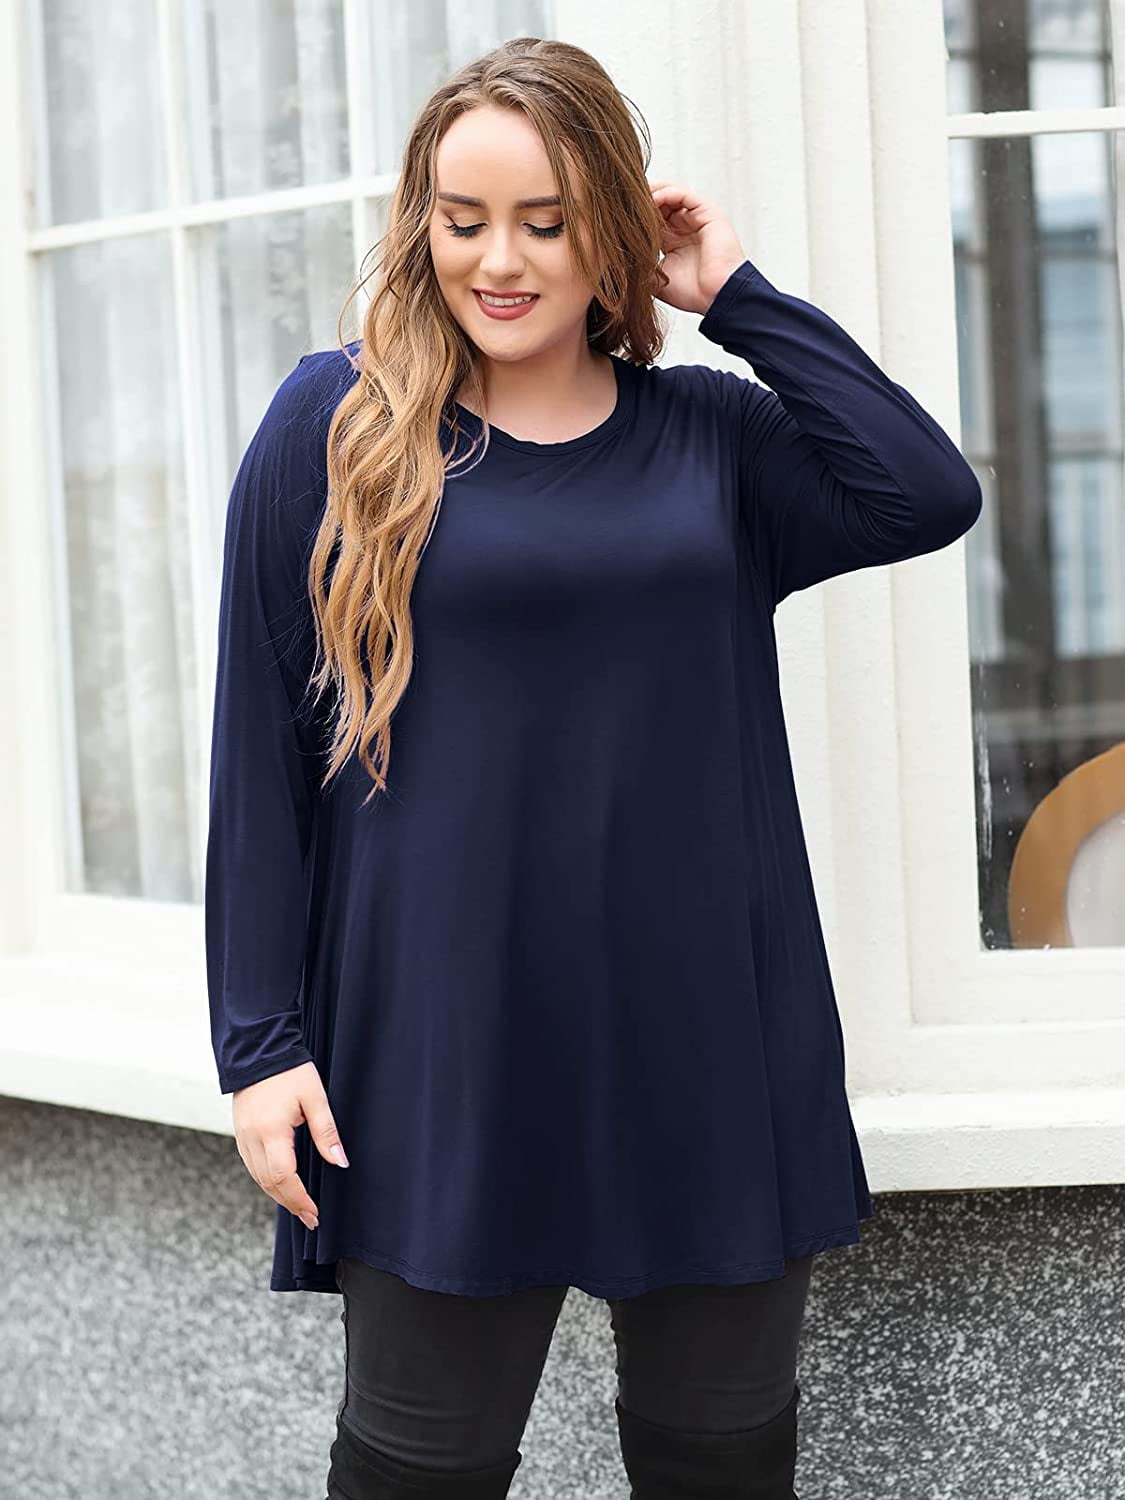 LARACE Plus Size Tunic Tops Long Sleeve Shirts for Women Swing Flowy Loose  Fit Clothes for Leggings Navy Blue 4X 